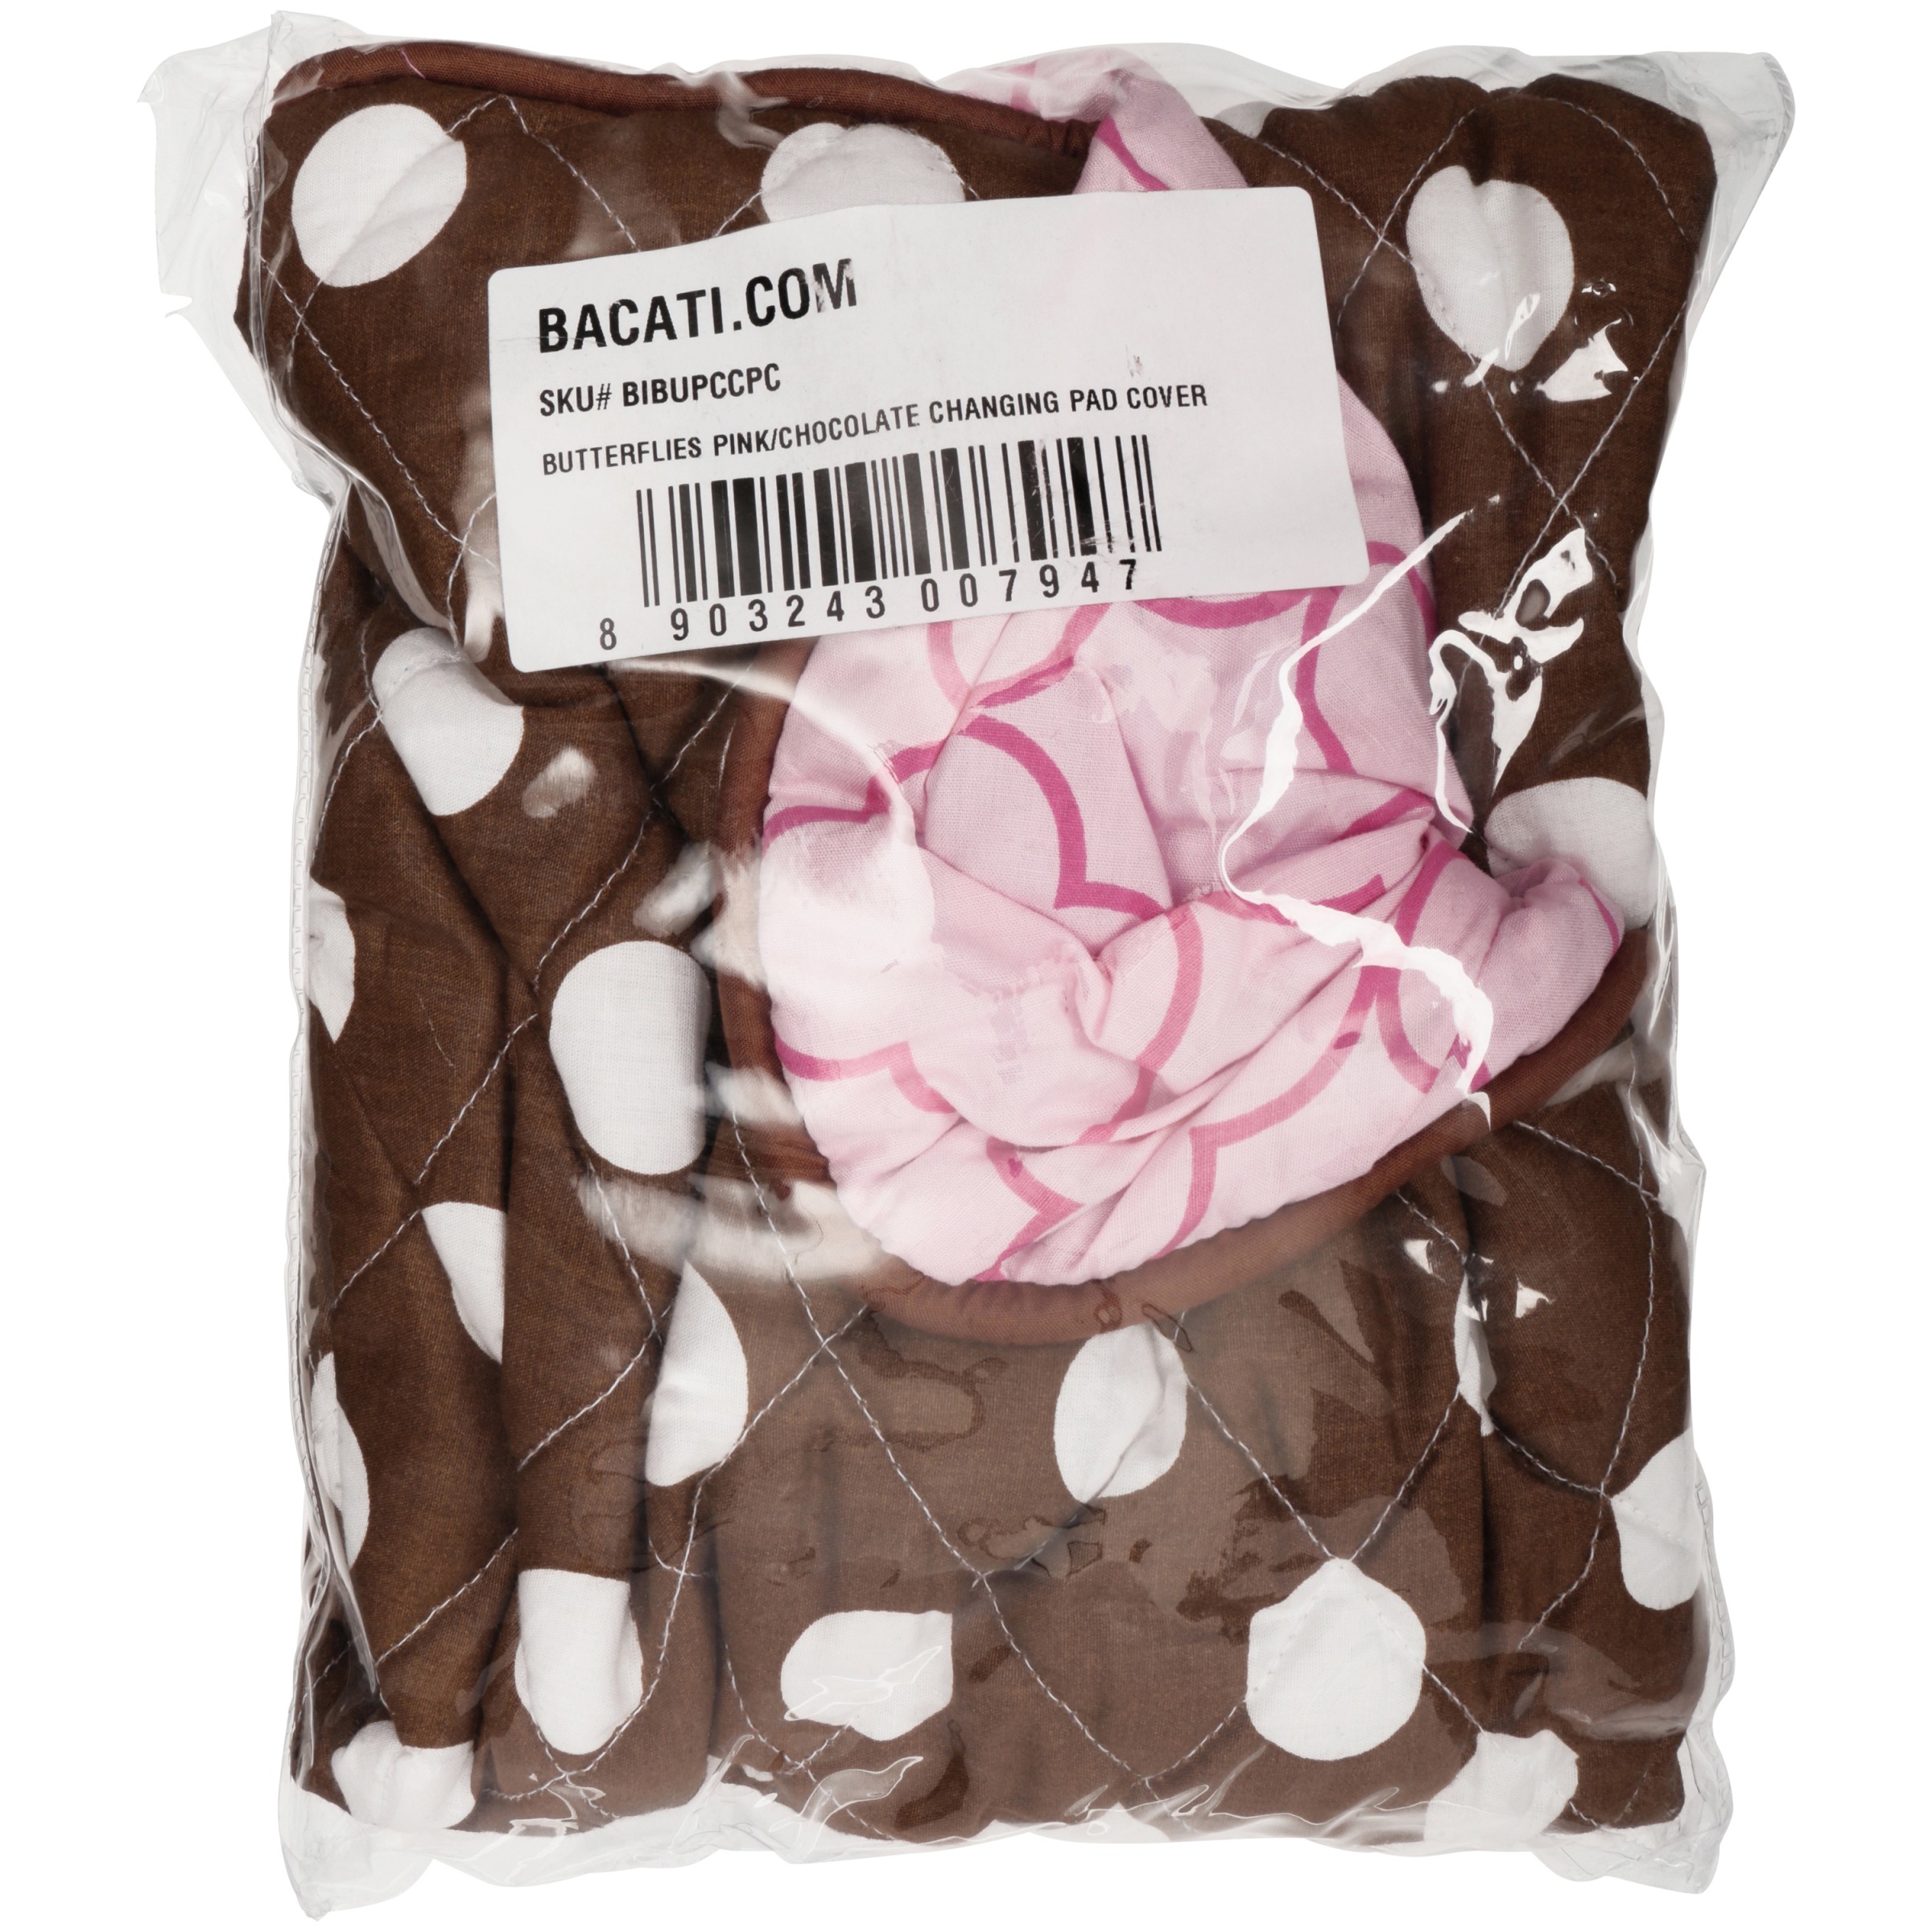 Bacati Butterflies Pink/Chocolate Changing Pad Cover - image 2 of 5